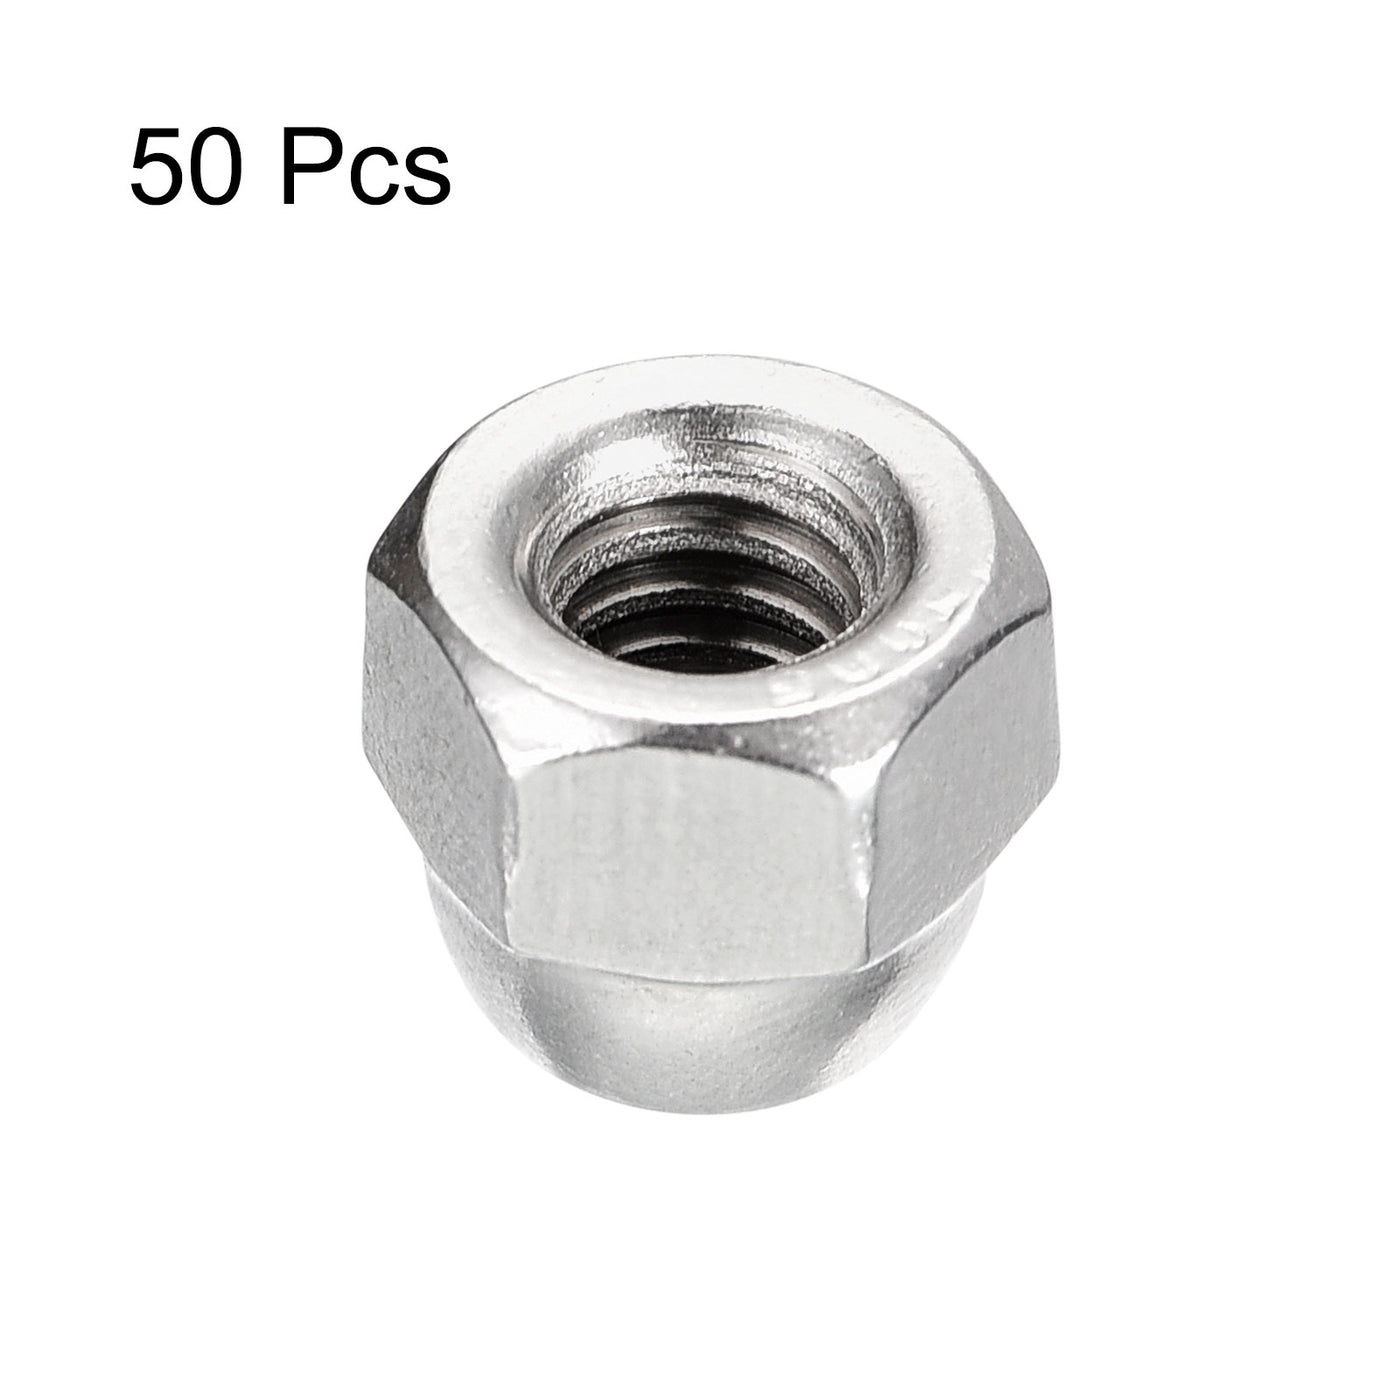 uxcell Uxcell 1/4-20 Acorn Cap Nuts,50pcs - 304 Stainless Steel Hardware Nuts, Acorn Hex Cap Dome Head Nuts for Fasteners (Silver)